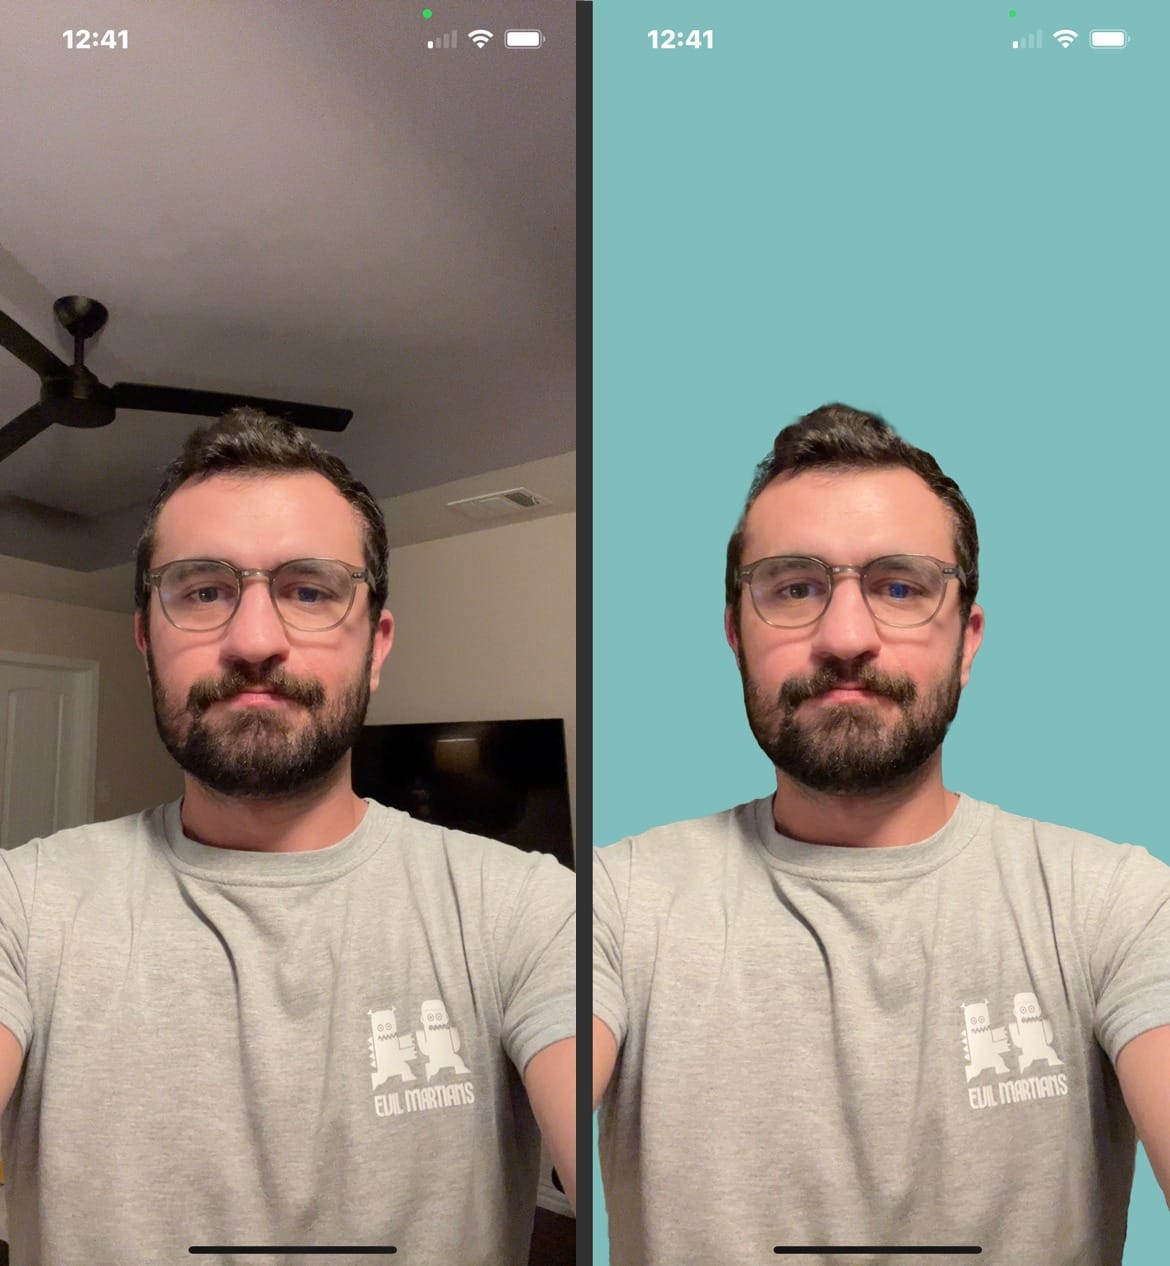 A side-by-side showing how person segmentation is used to completely remove the background behind a man